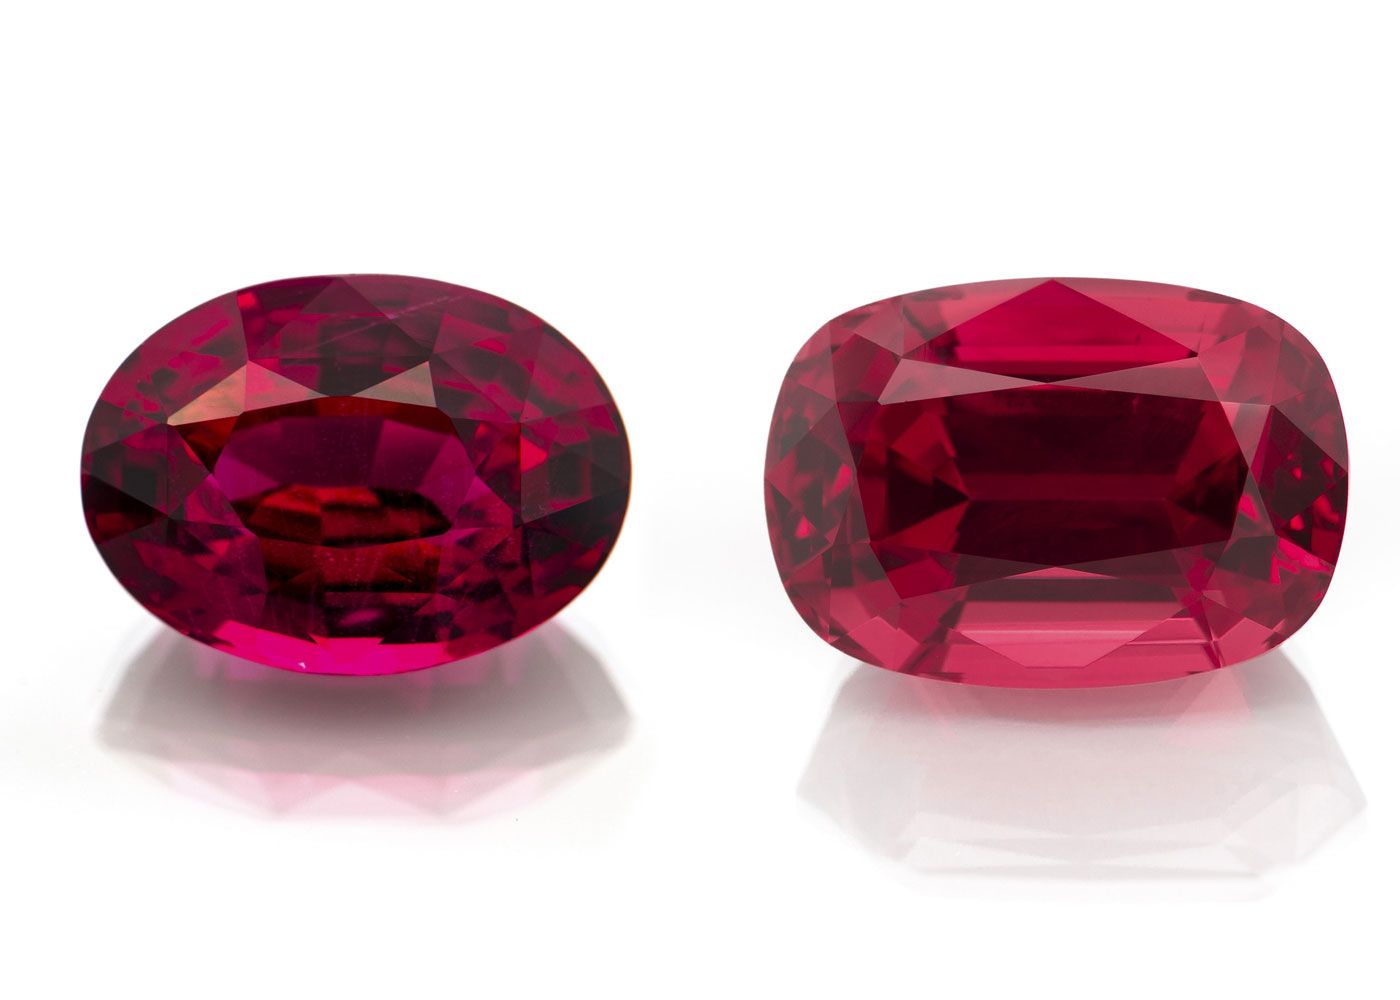 a ruby and a red spinel gemstone positioned side by side